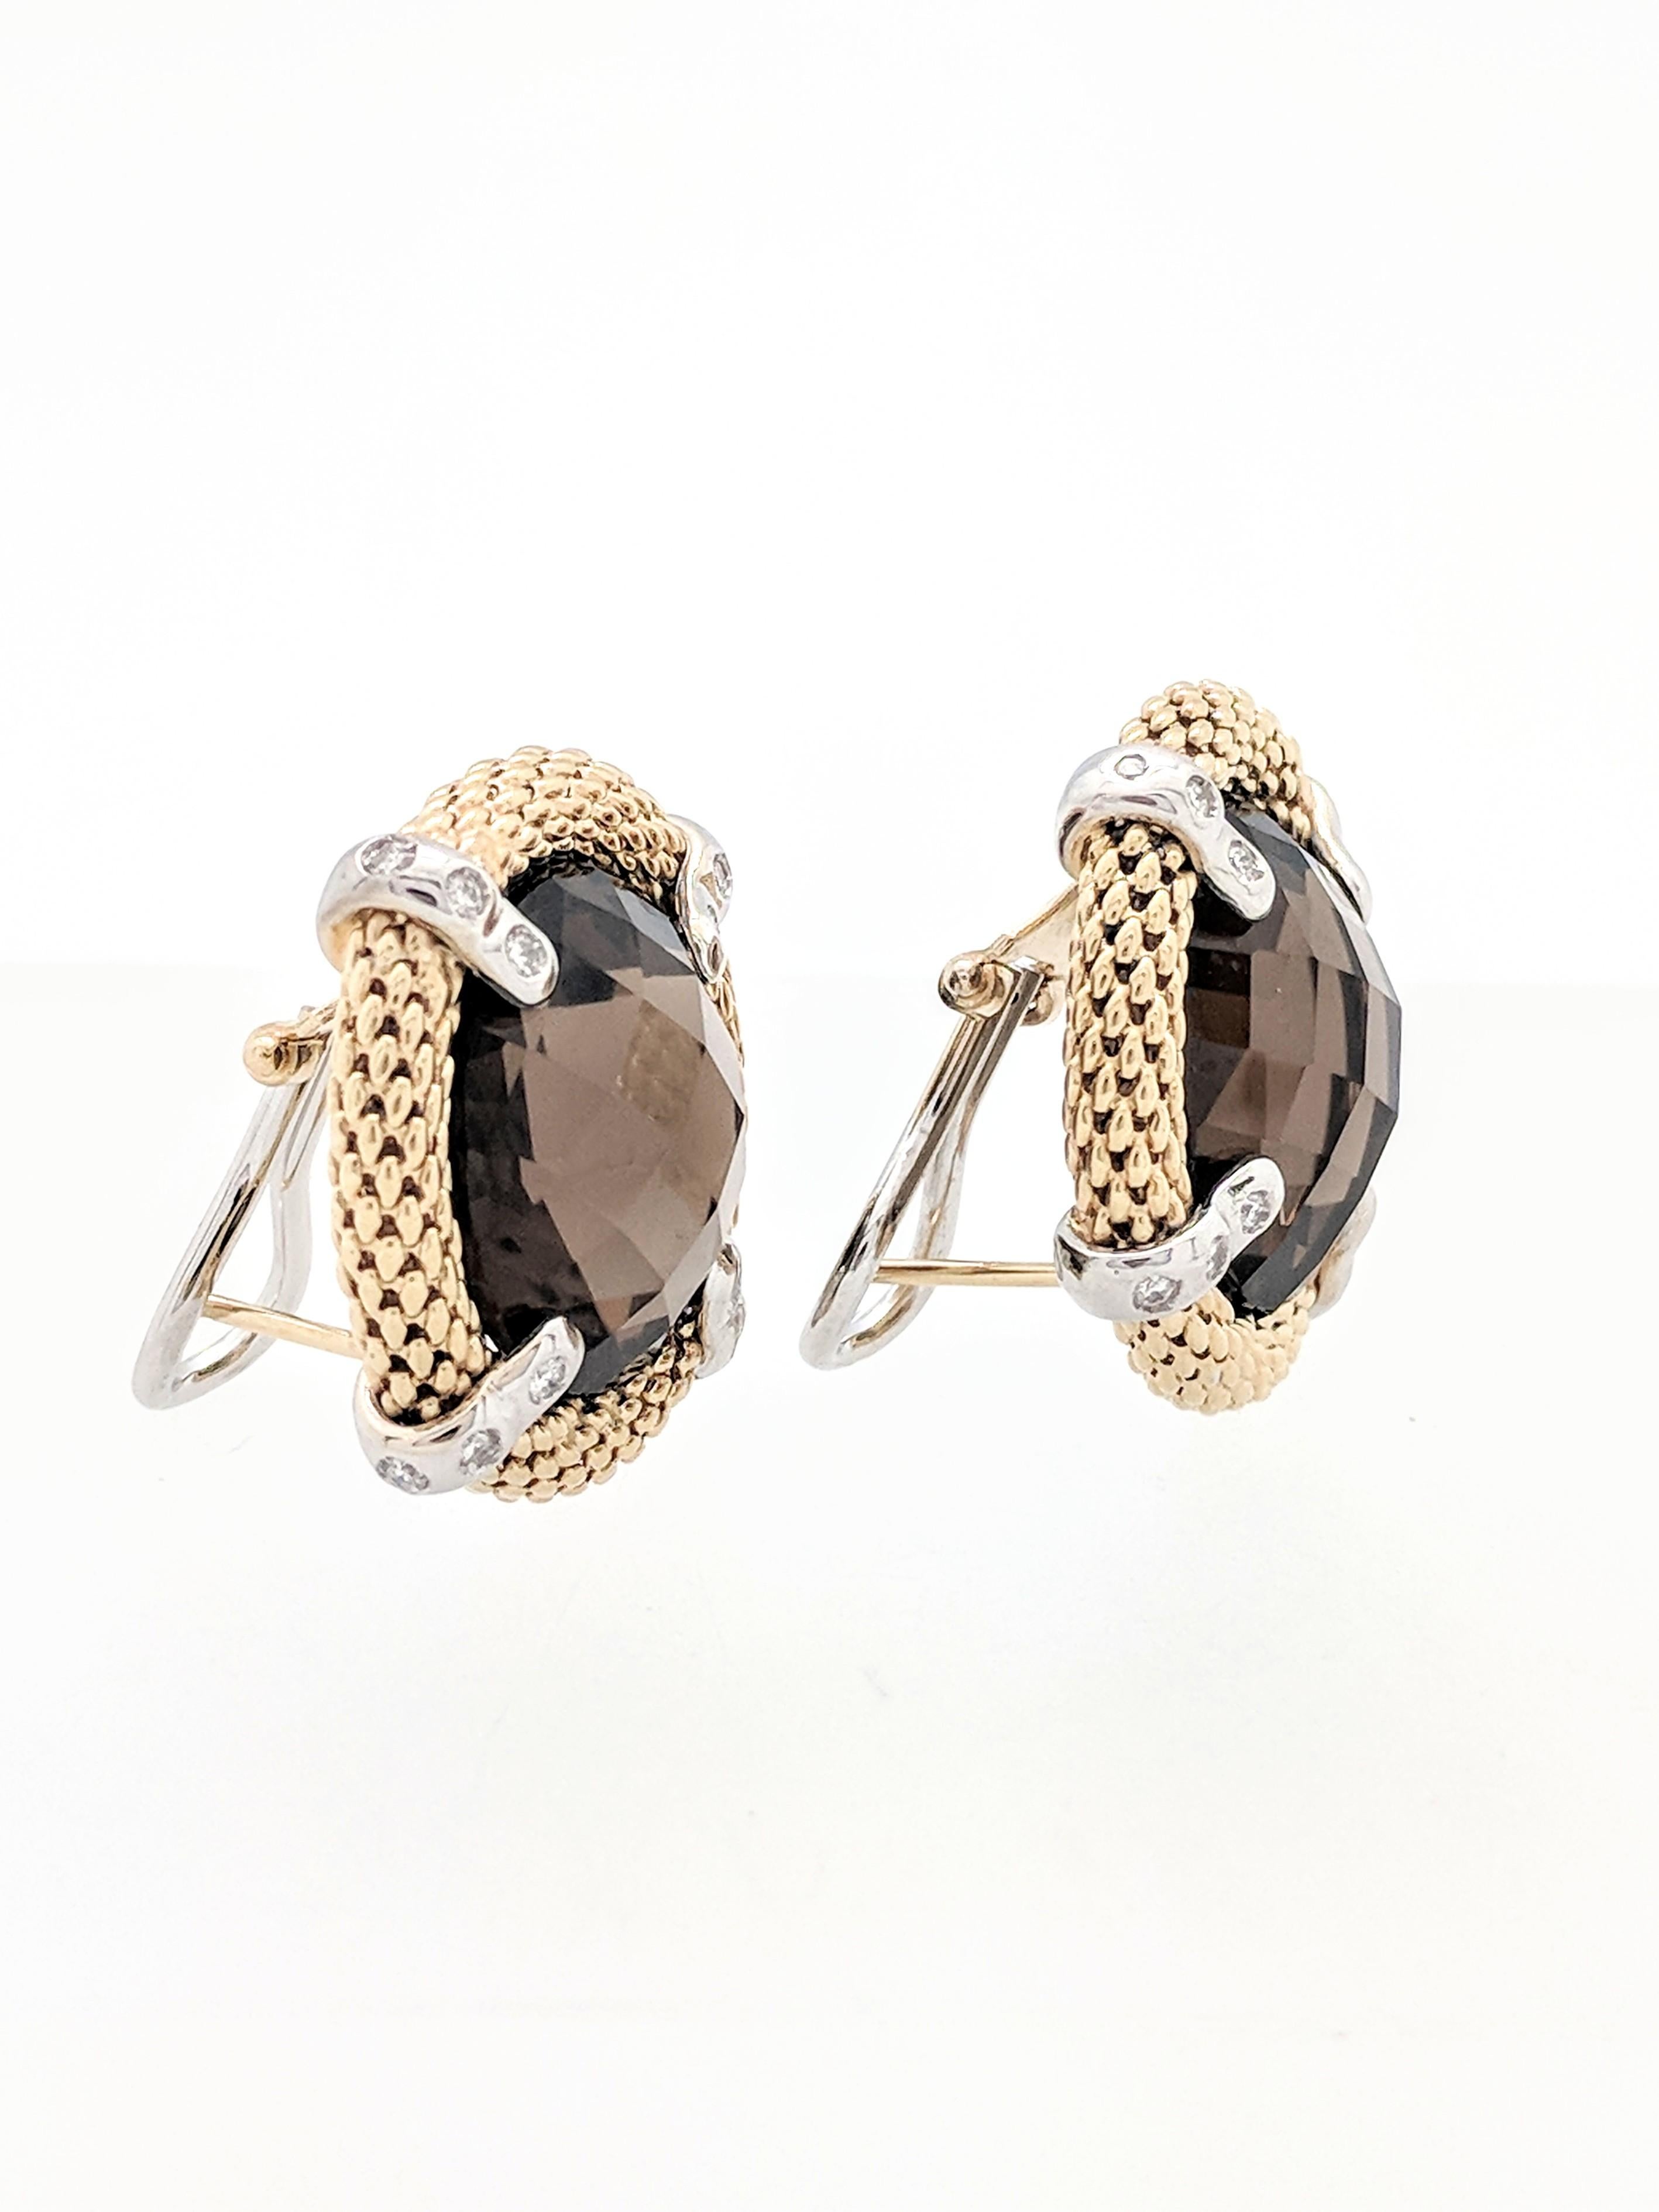 14 Karat Two-Tone Smoky Quartz and Diamond Earrings with Omega Backs In Excellent Condition For Sale In Gainesville, FL